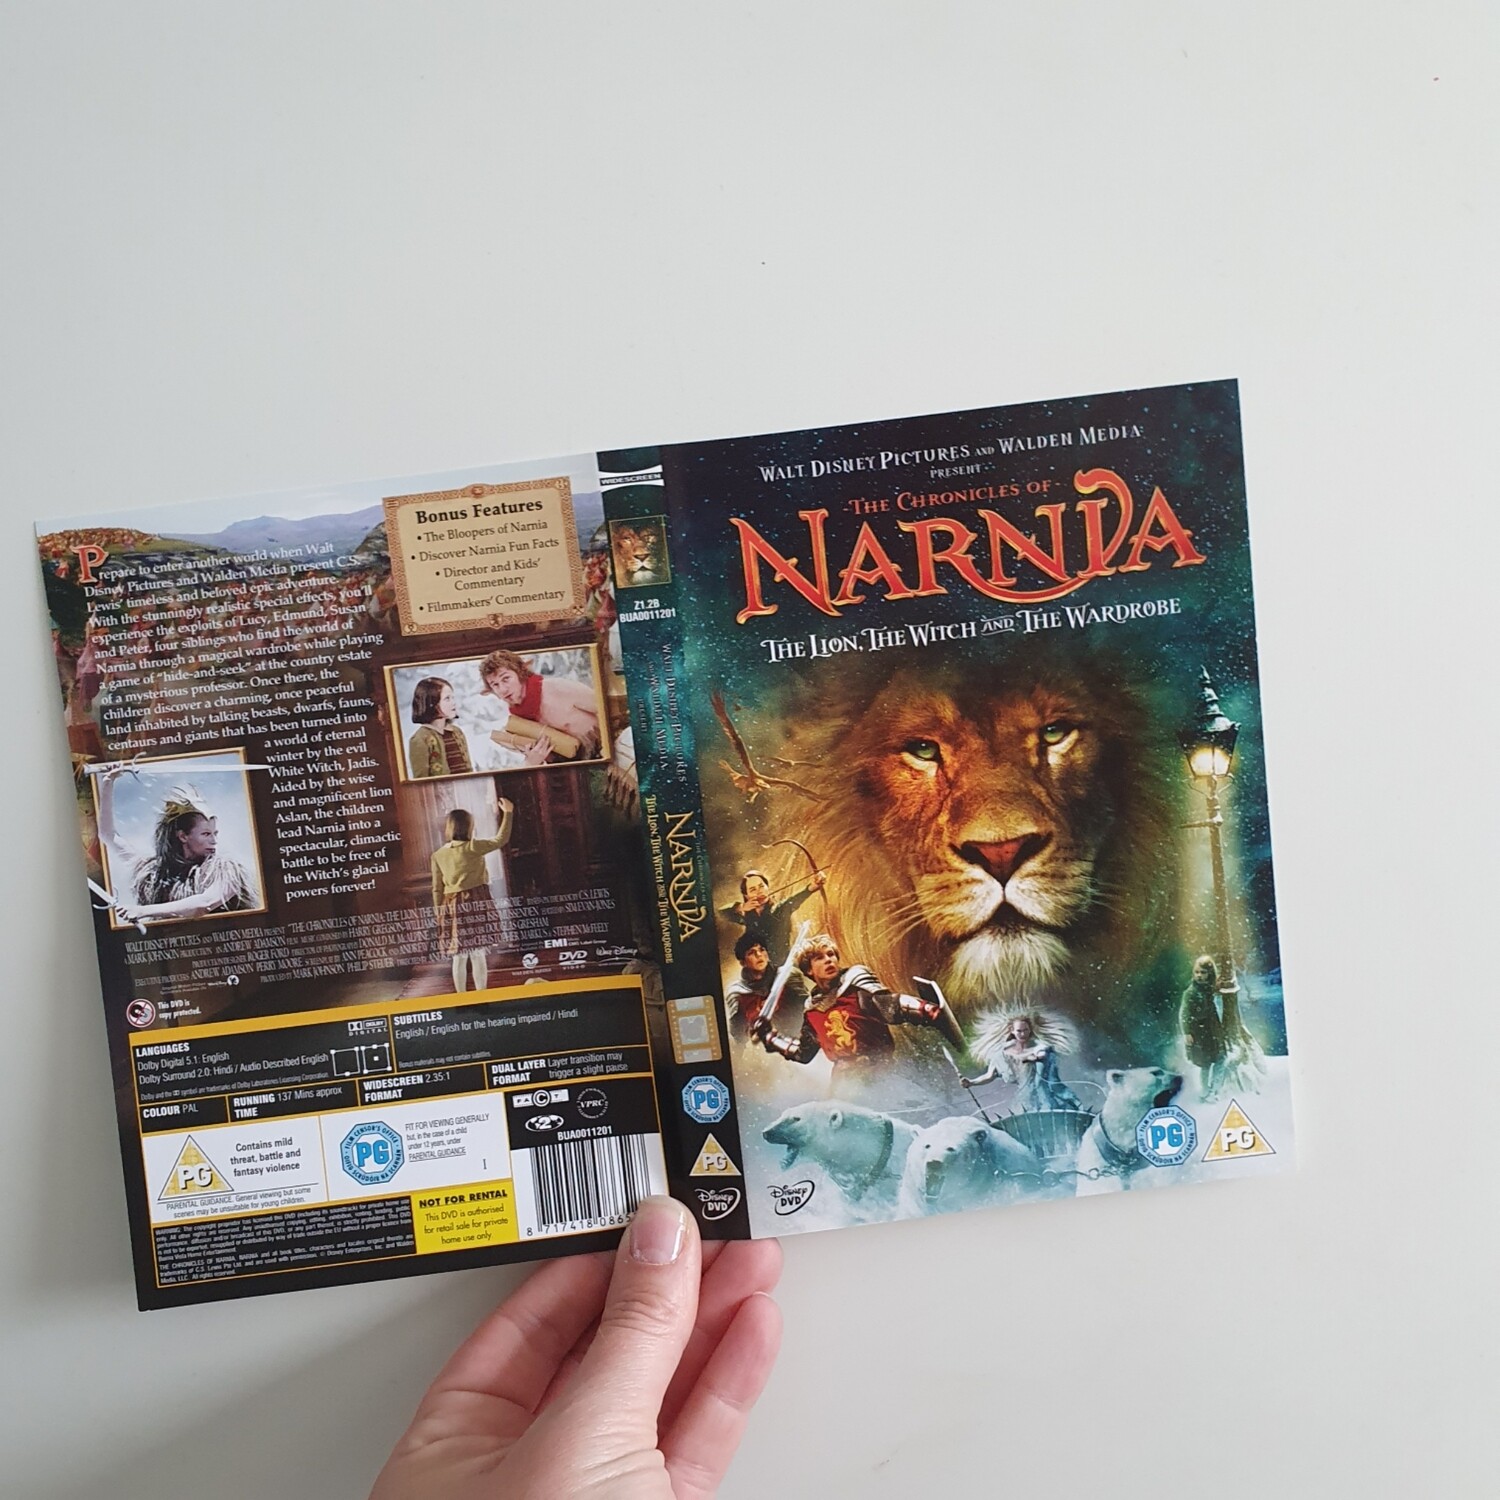 The Lion the Witch and the Wardrobe, Narnia Notebook - made from a DVD sleeve